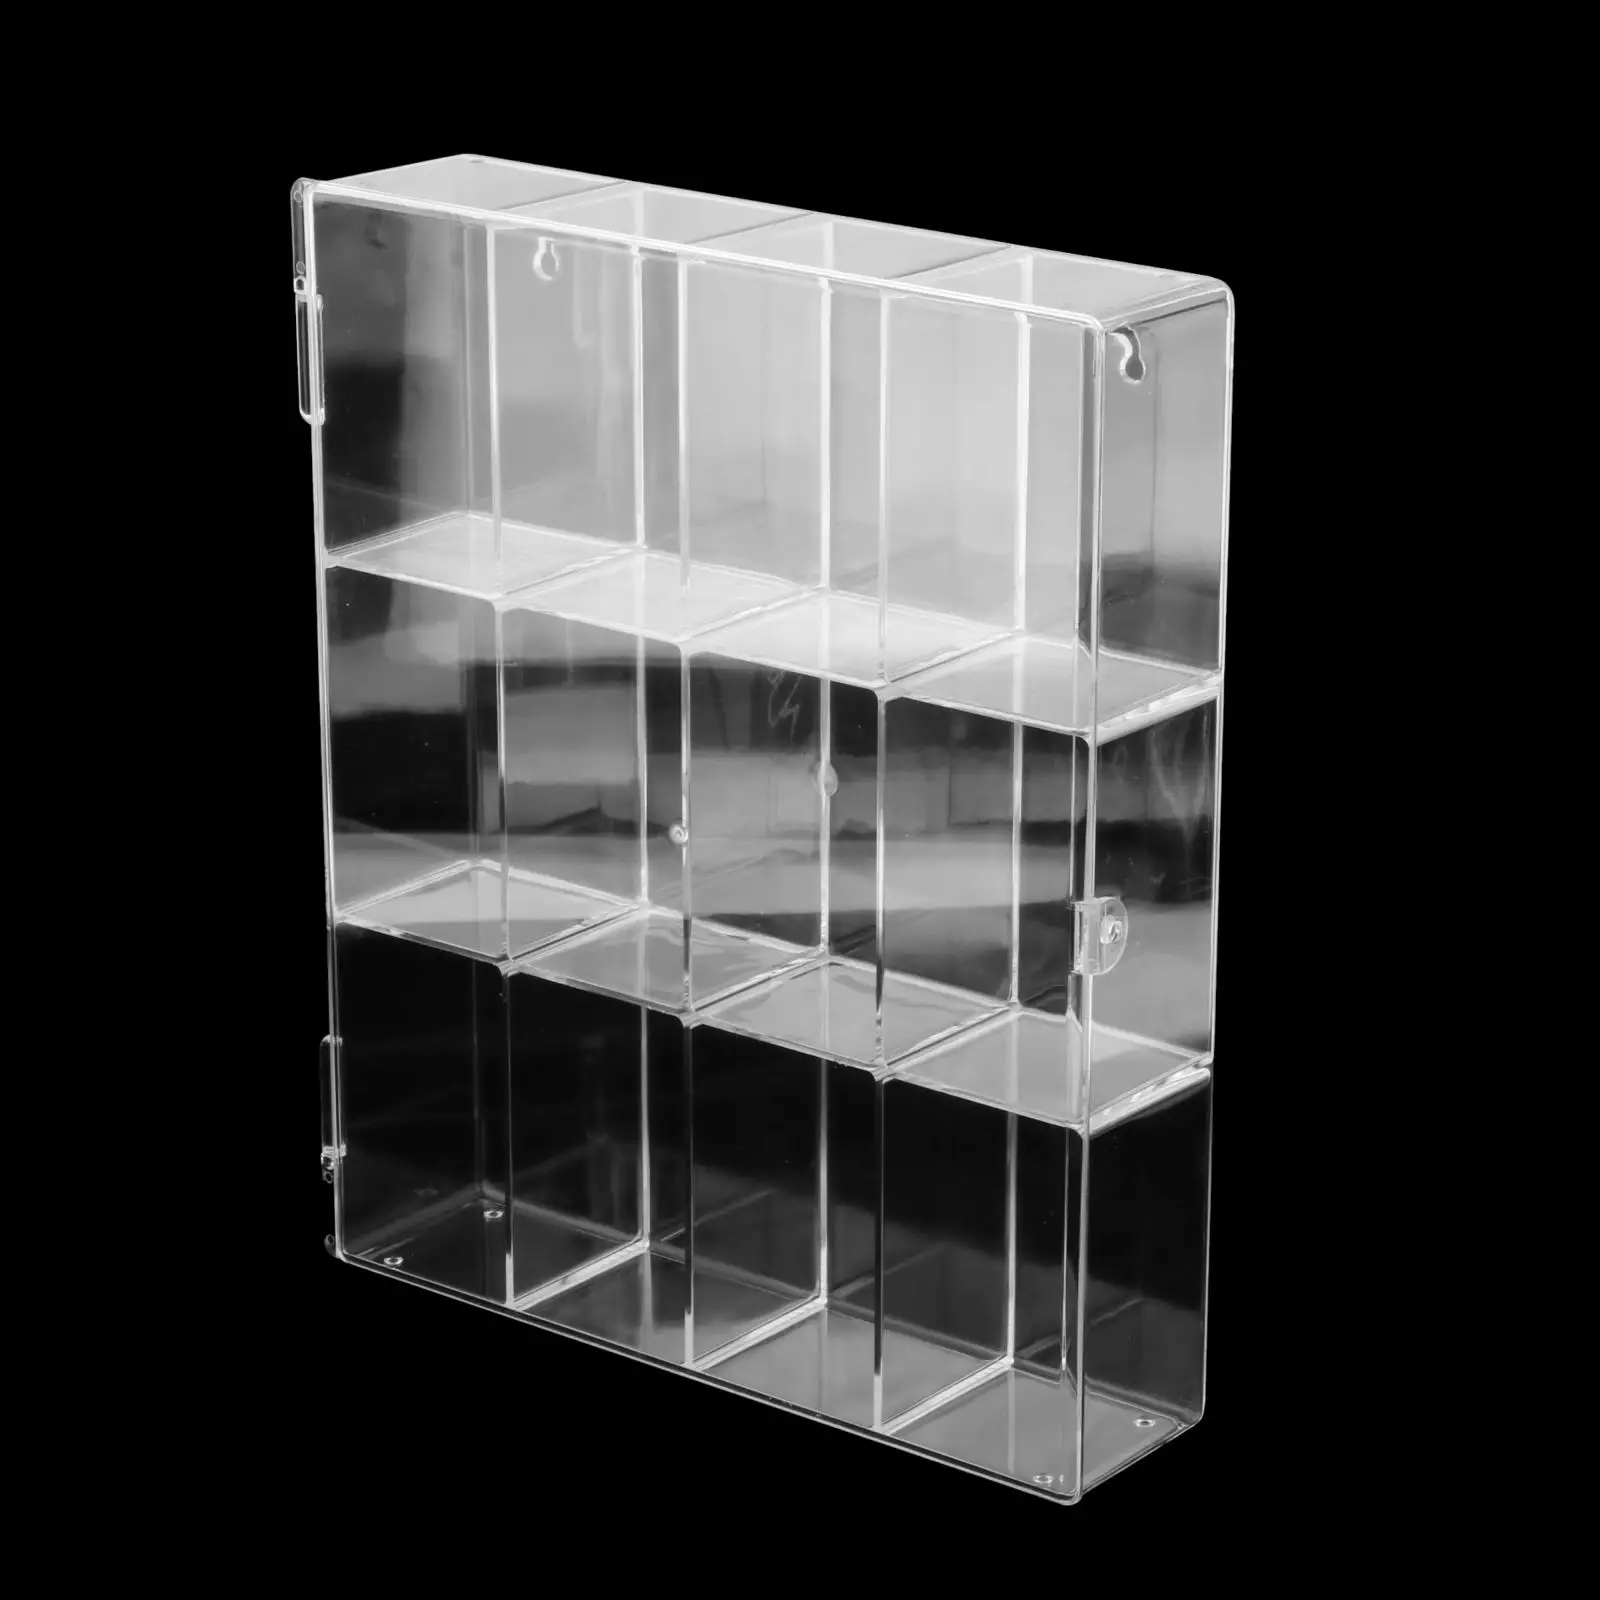 Details about   Acrylic Display Storage Case Box Show Case Dustproof For Doll Model DisplayB^m^ 